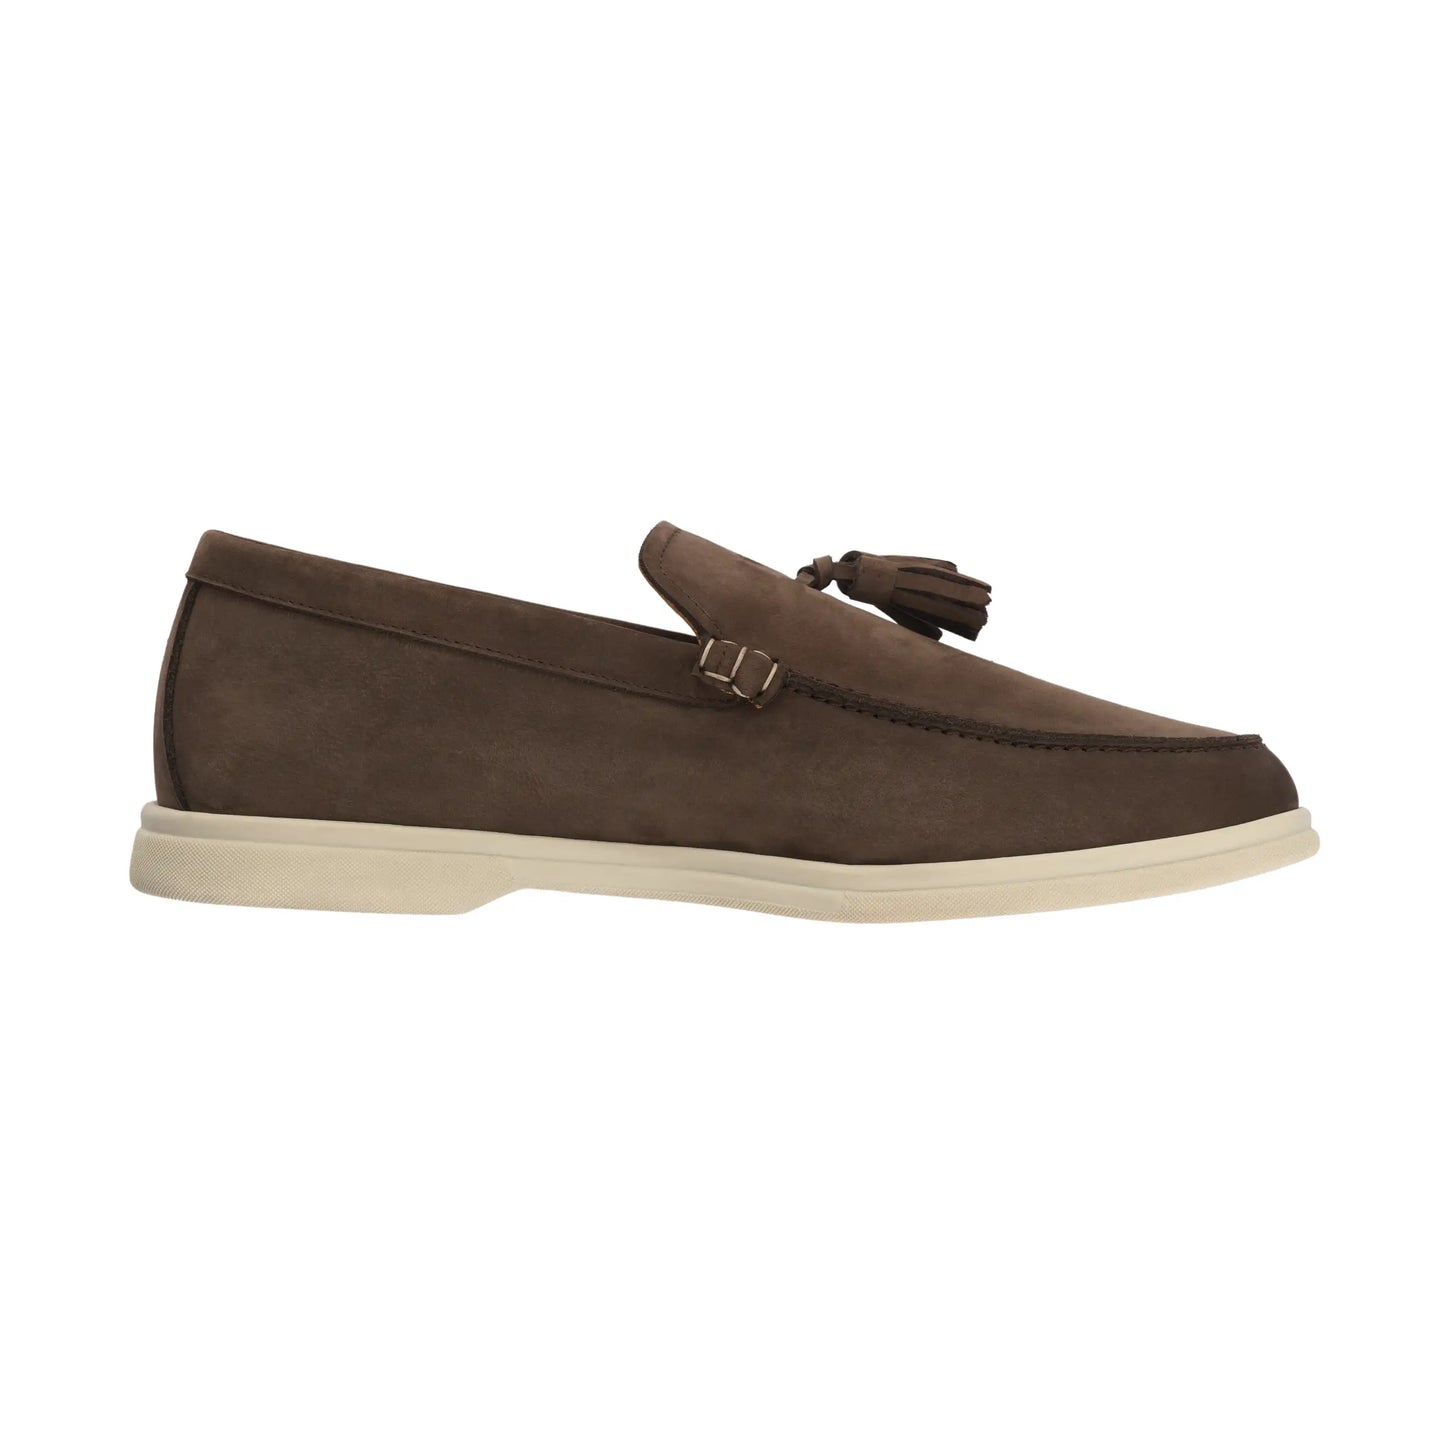 Suede Tassel Loafer in Taupe